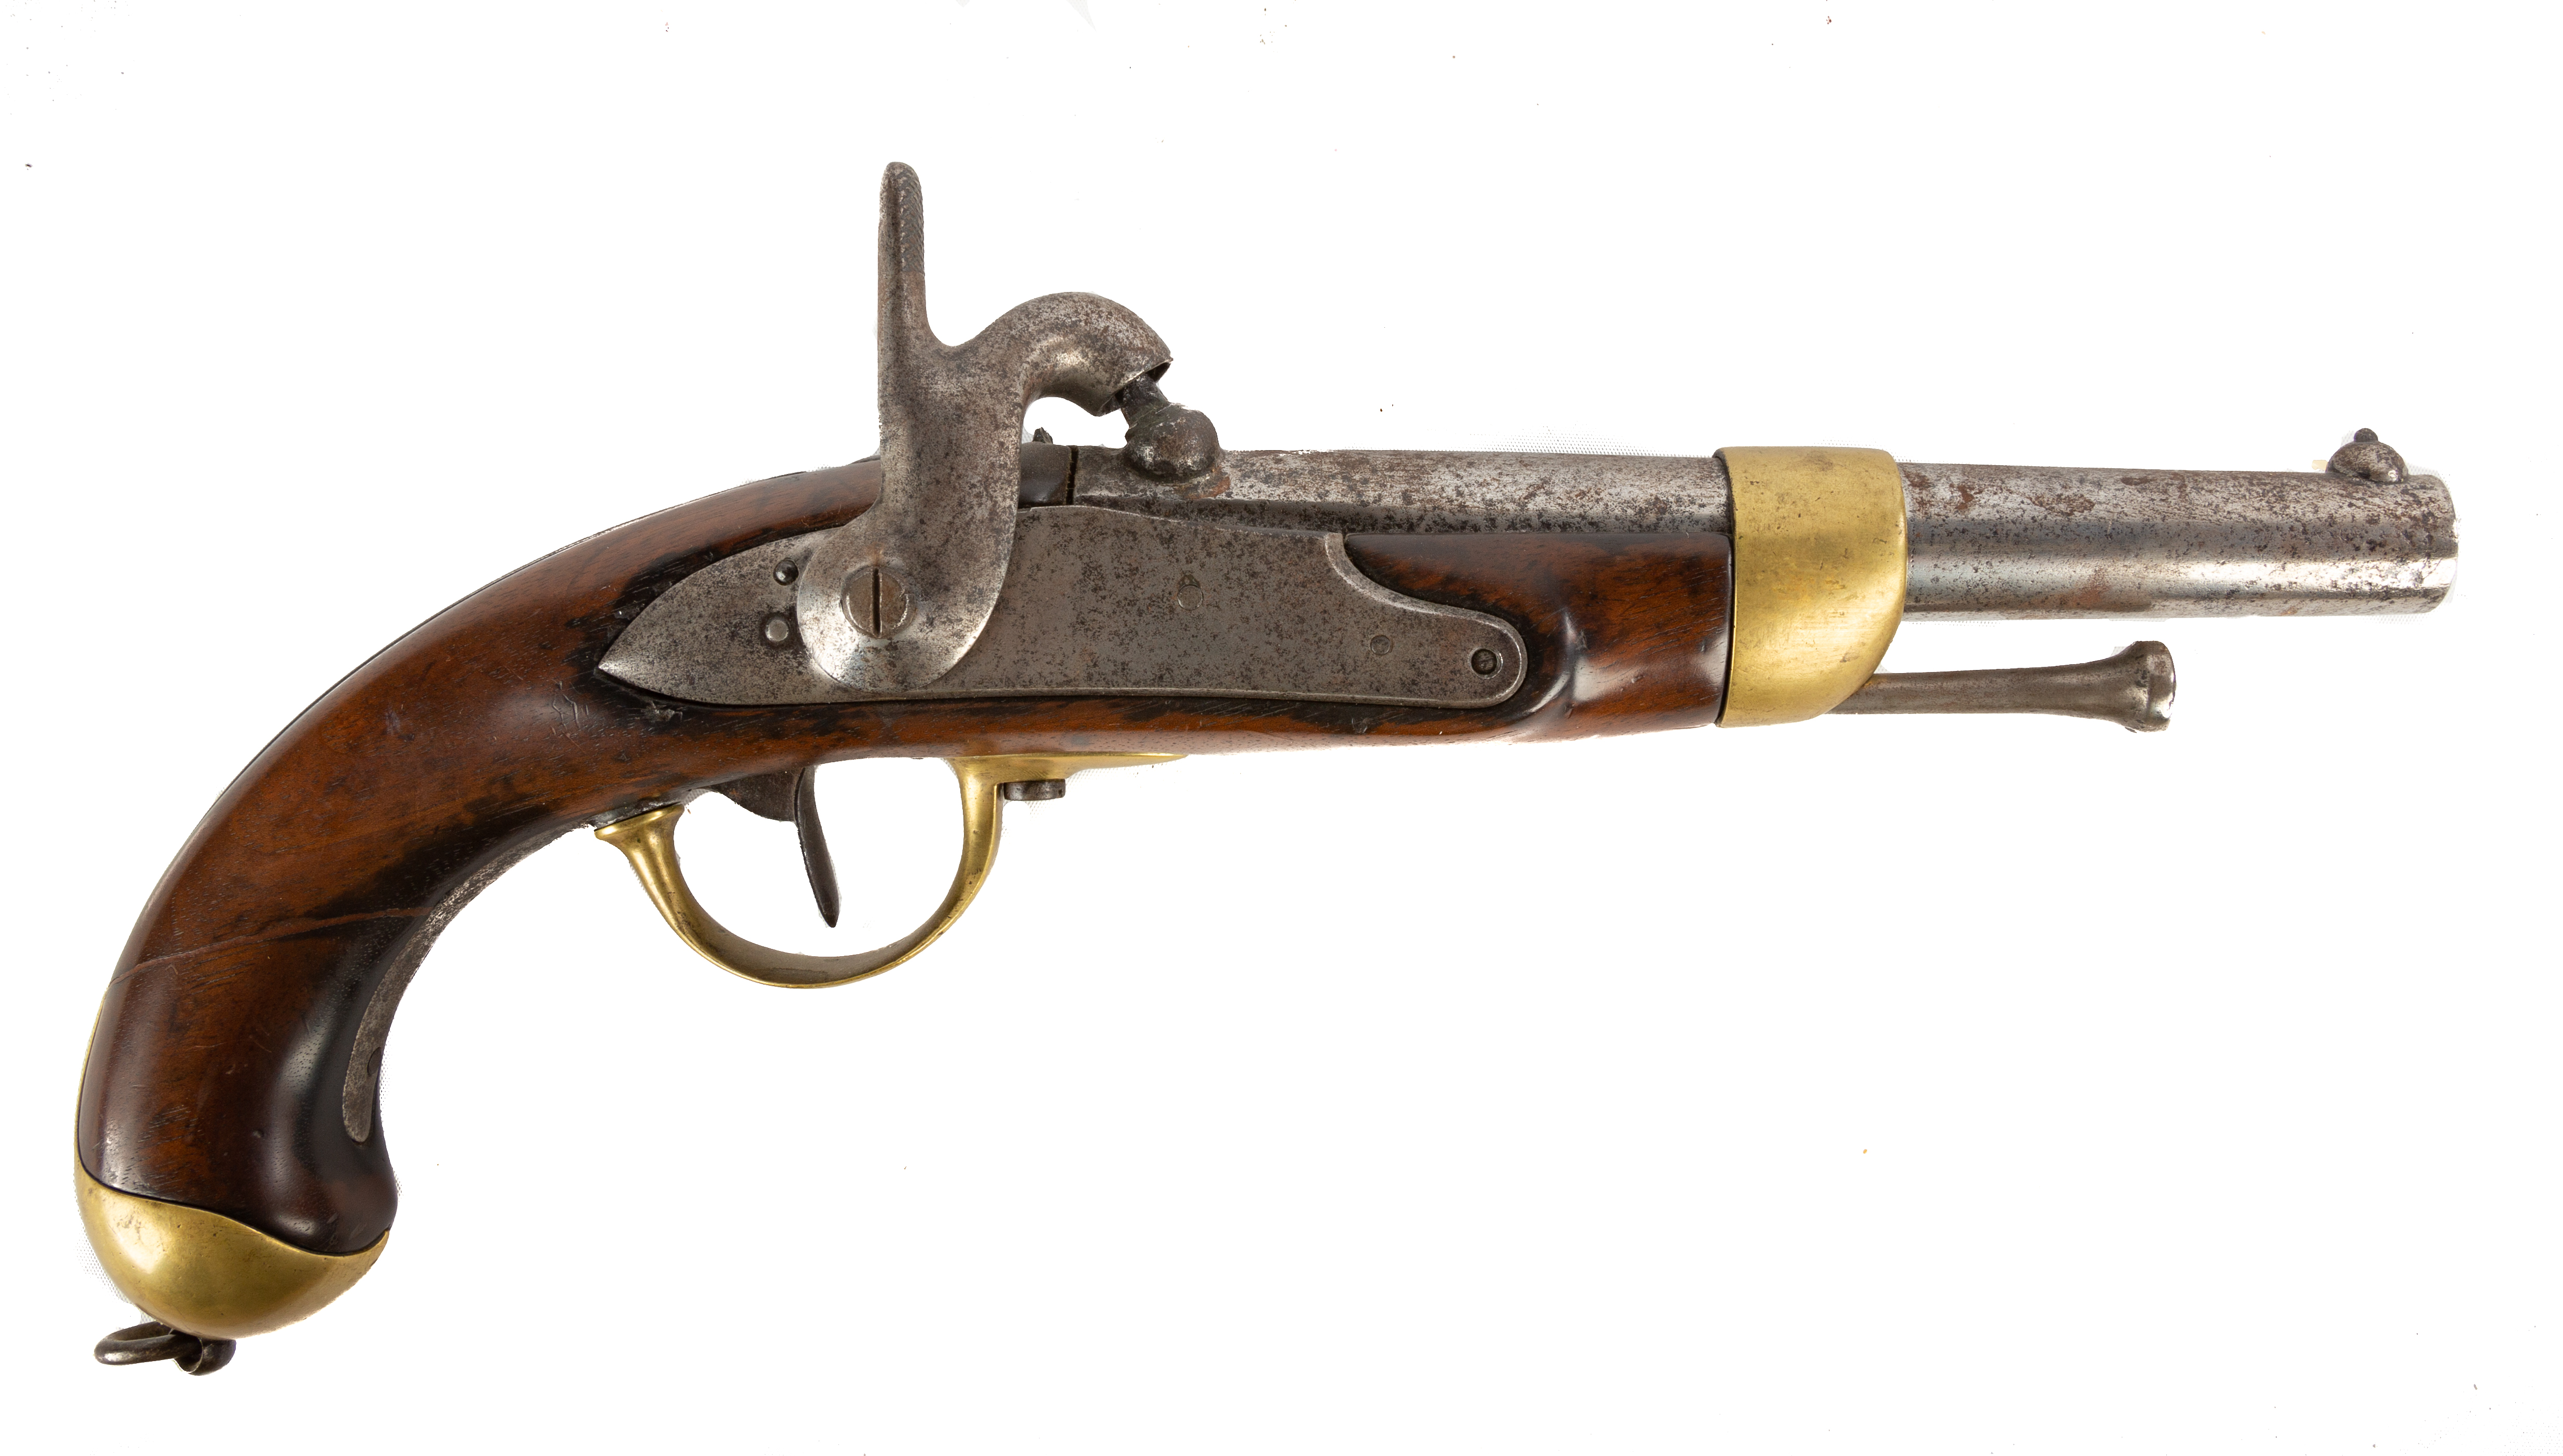 EARLY PERCUSSION PISTOL dated 1822.